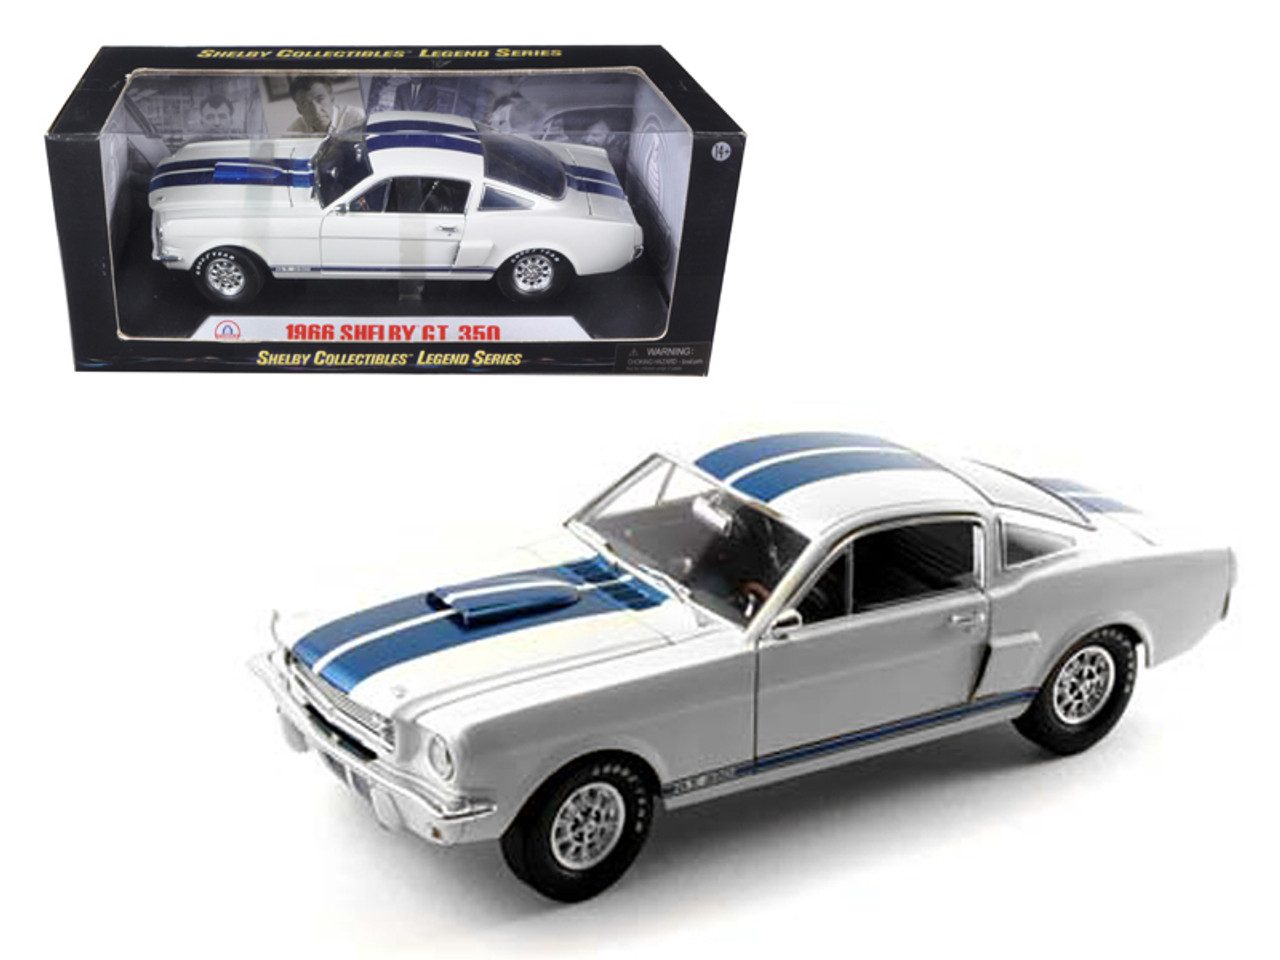 1/18 Shelby Collectibles 1966 Ford Mustang Shelby GT350 (White with Blue Stripes) Diecast Car Model